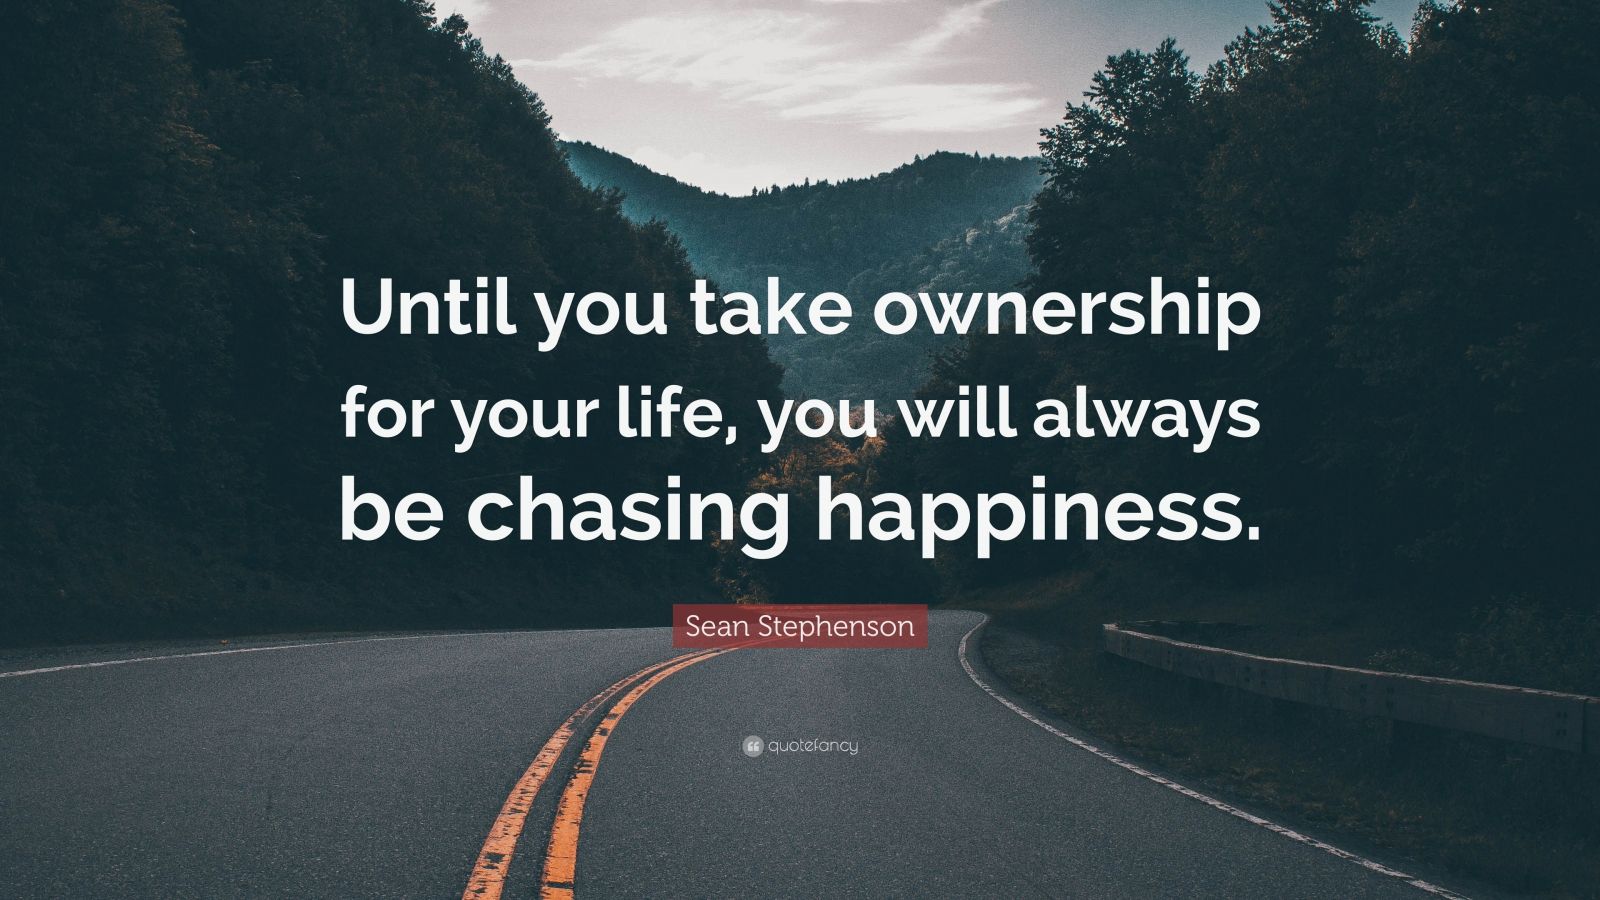 Sean Stephenson Quote: “Until you take ownership for your life, you